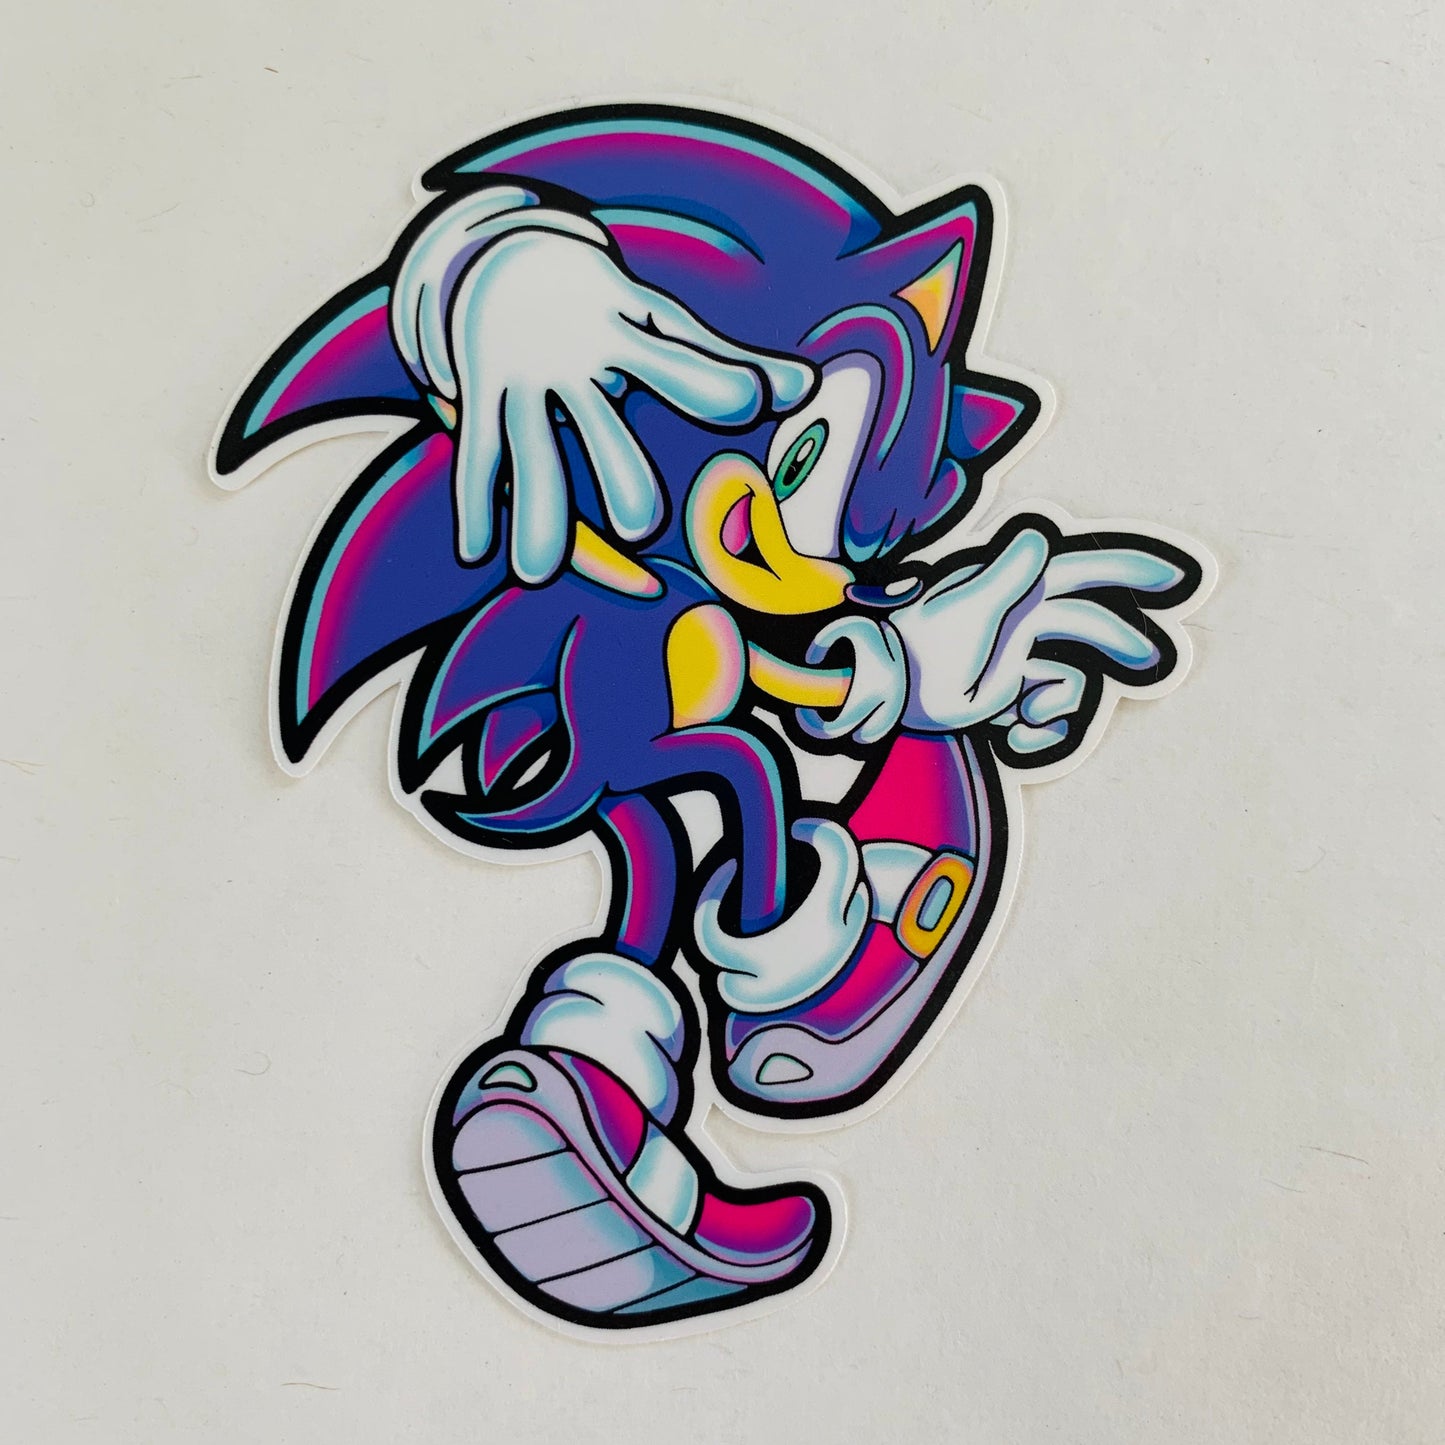 Be Cool, Be Wild, and Be Groovy - 3.25" Sonic Sticker